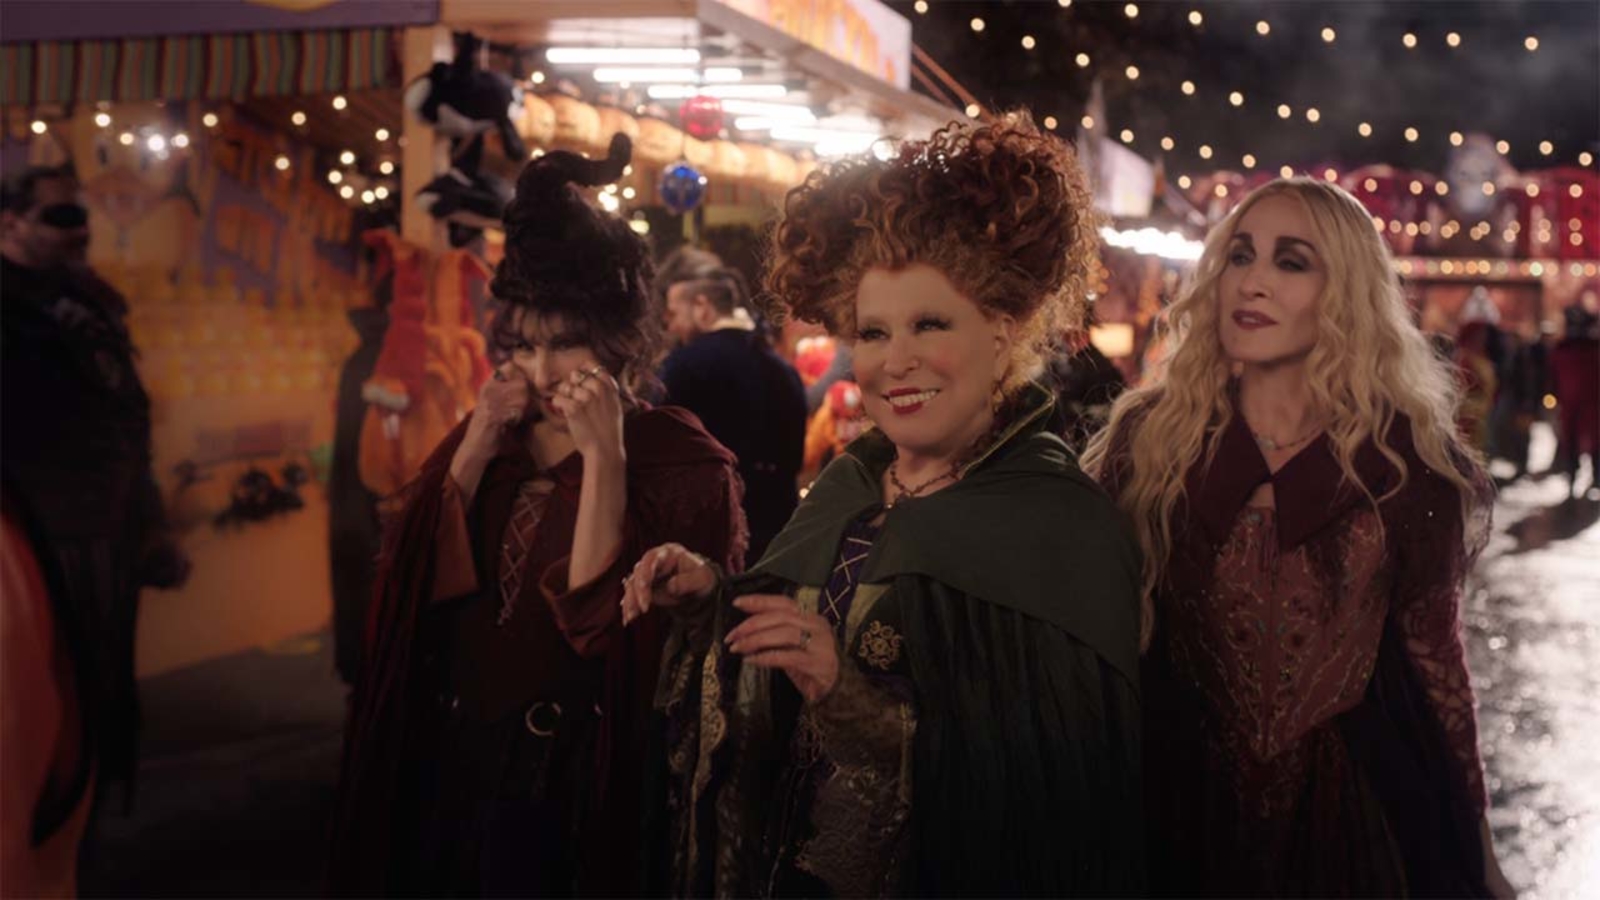 Hocus Pocus 2' trailer has arrived: Watch first look at 2022 Disney Plus film now